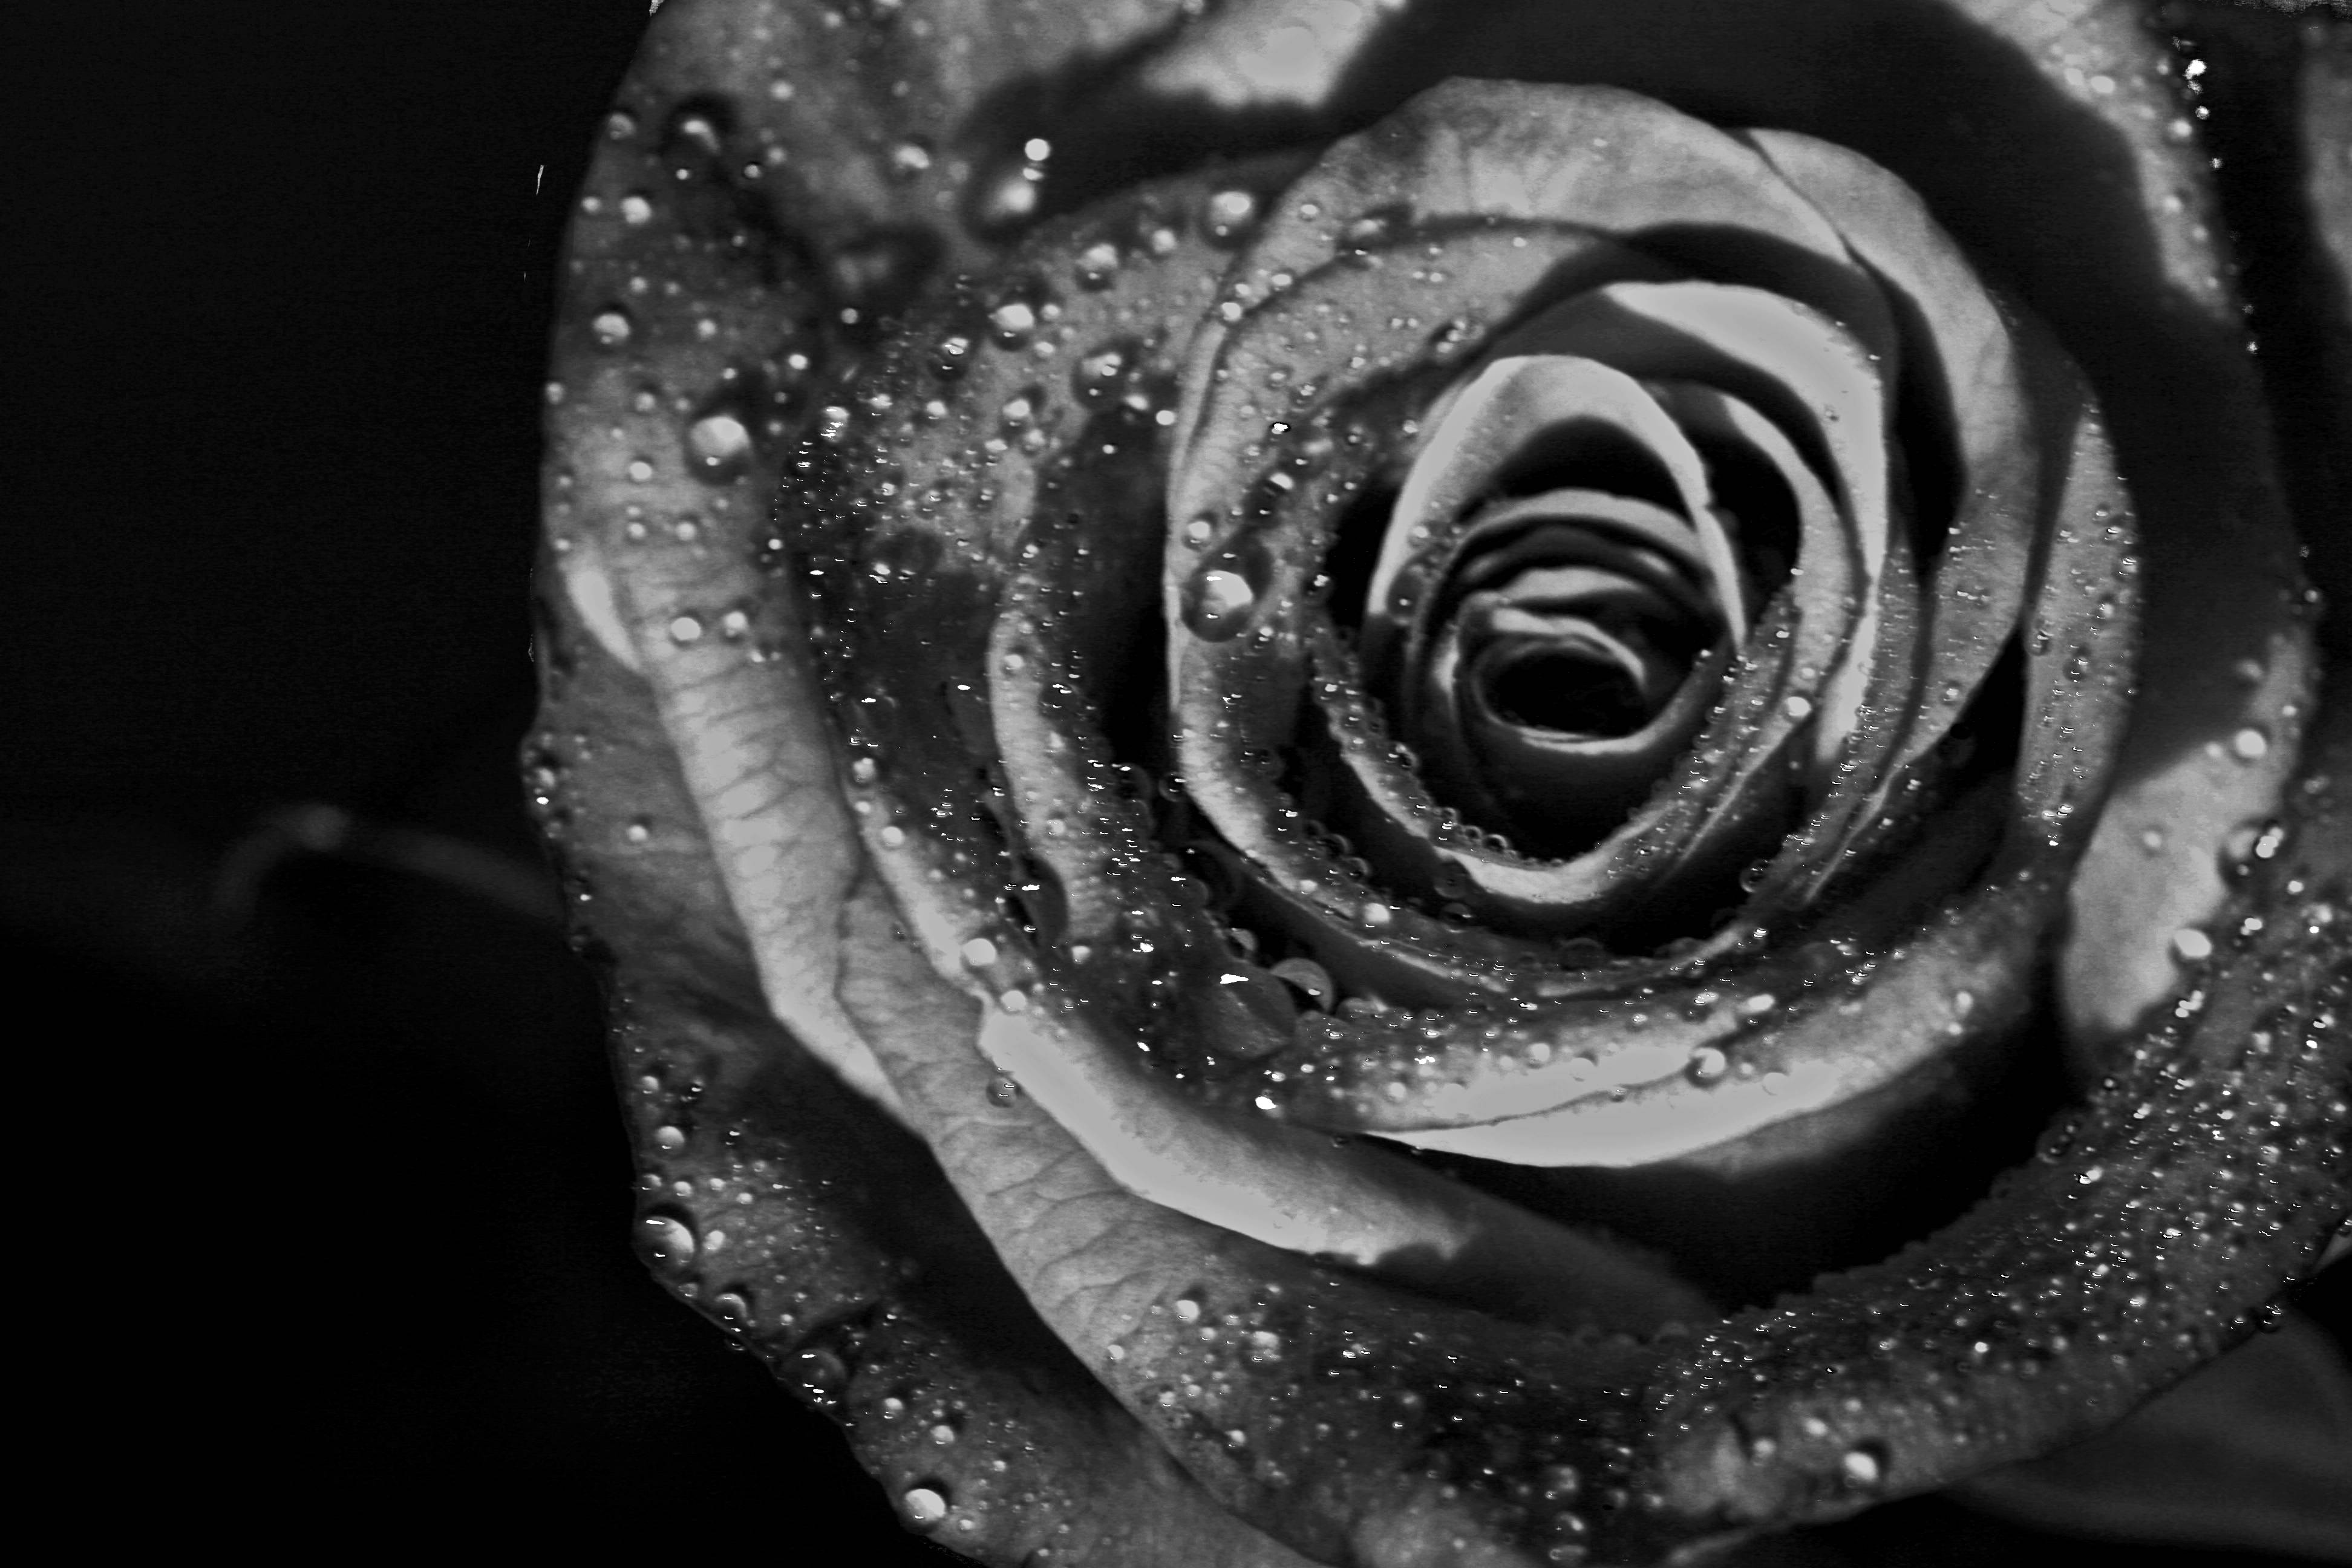 Black And White Rose Hd Wallpapers